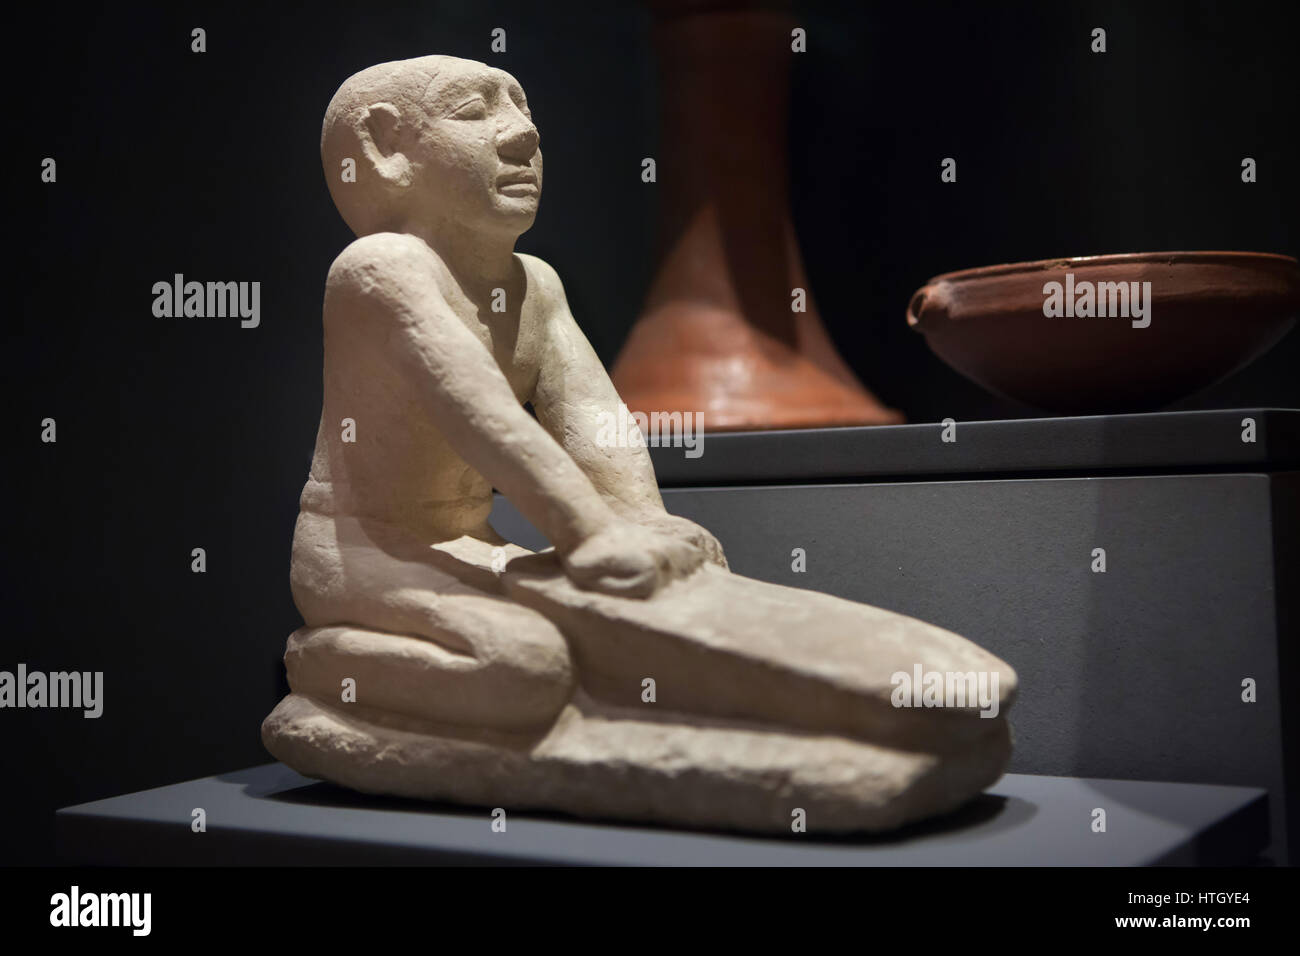 Servant grinding flour. Limestone statue from about 2250 BC, 6th Dynasty, Old Kingdom of Ancient Egypt, on display in the Staatliches Museum Agyptischer Kunst (State Museum of Egyptian Art) in Munich, Bavaria, Germany. Stock Photo